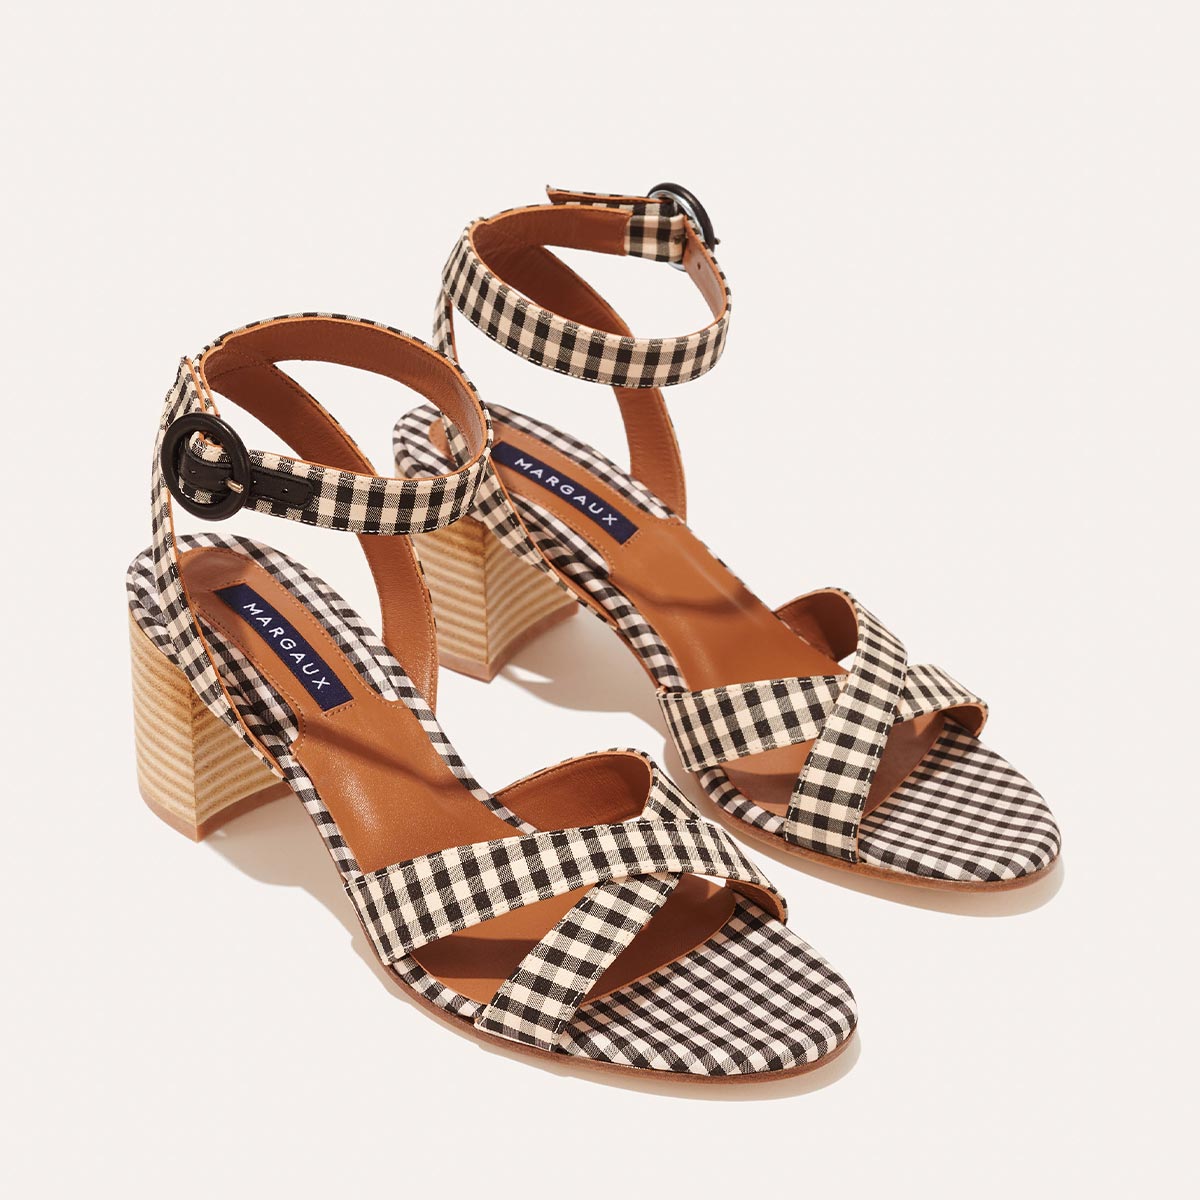 The City Sandal - Tan and Black Gingham